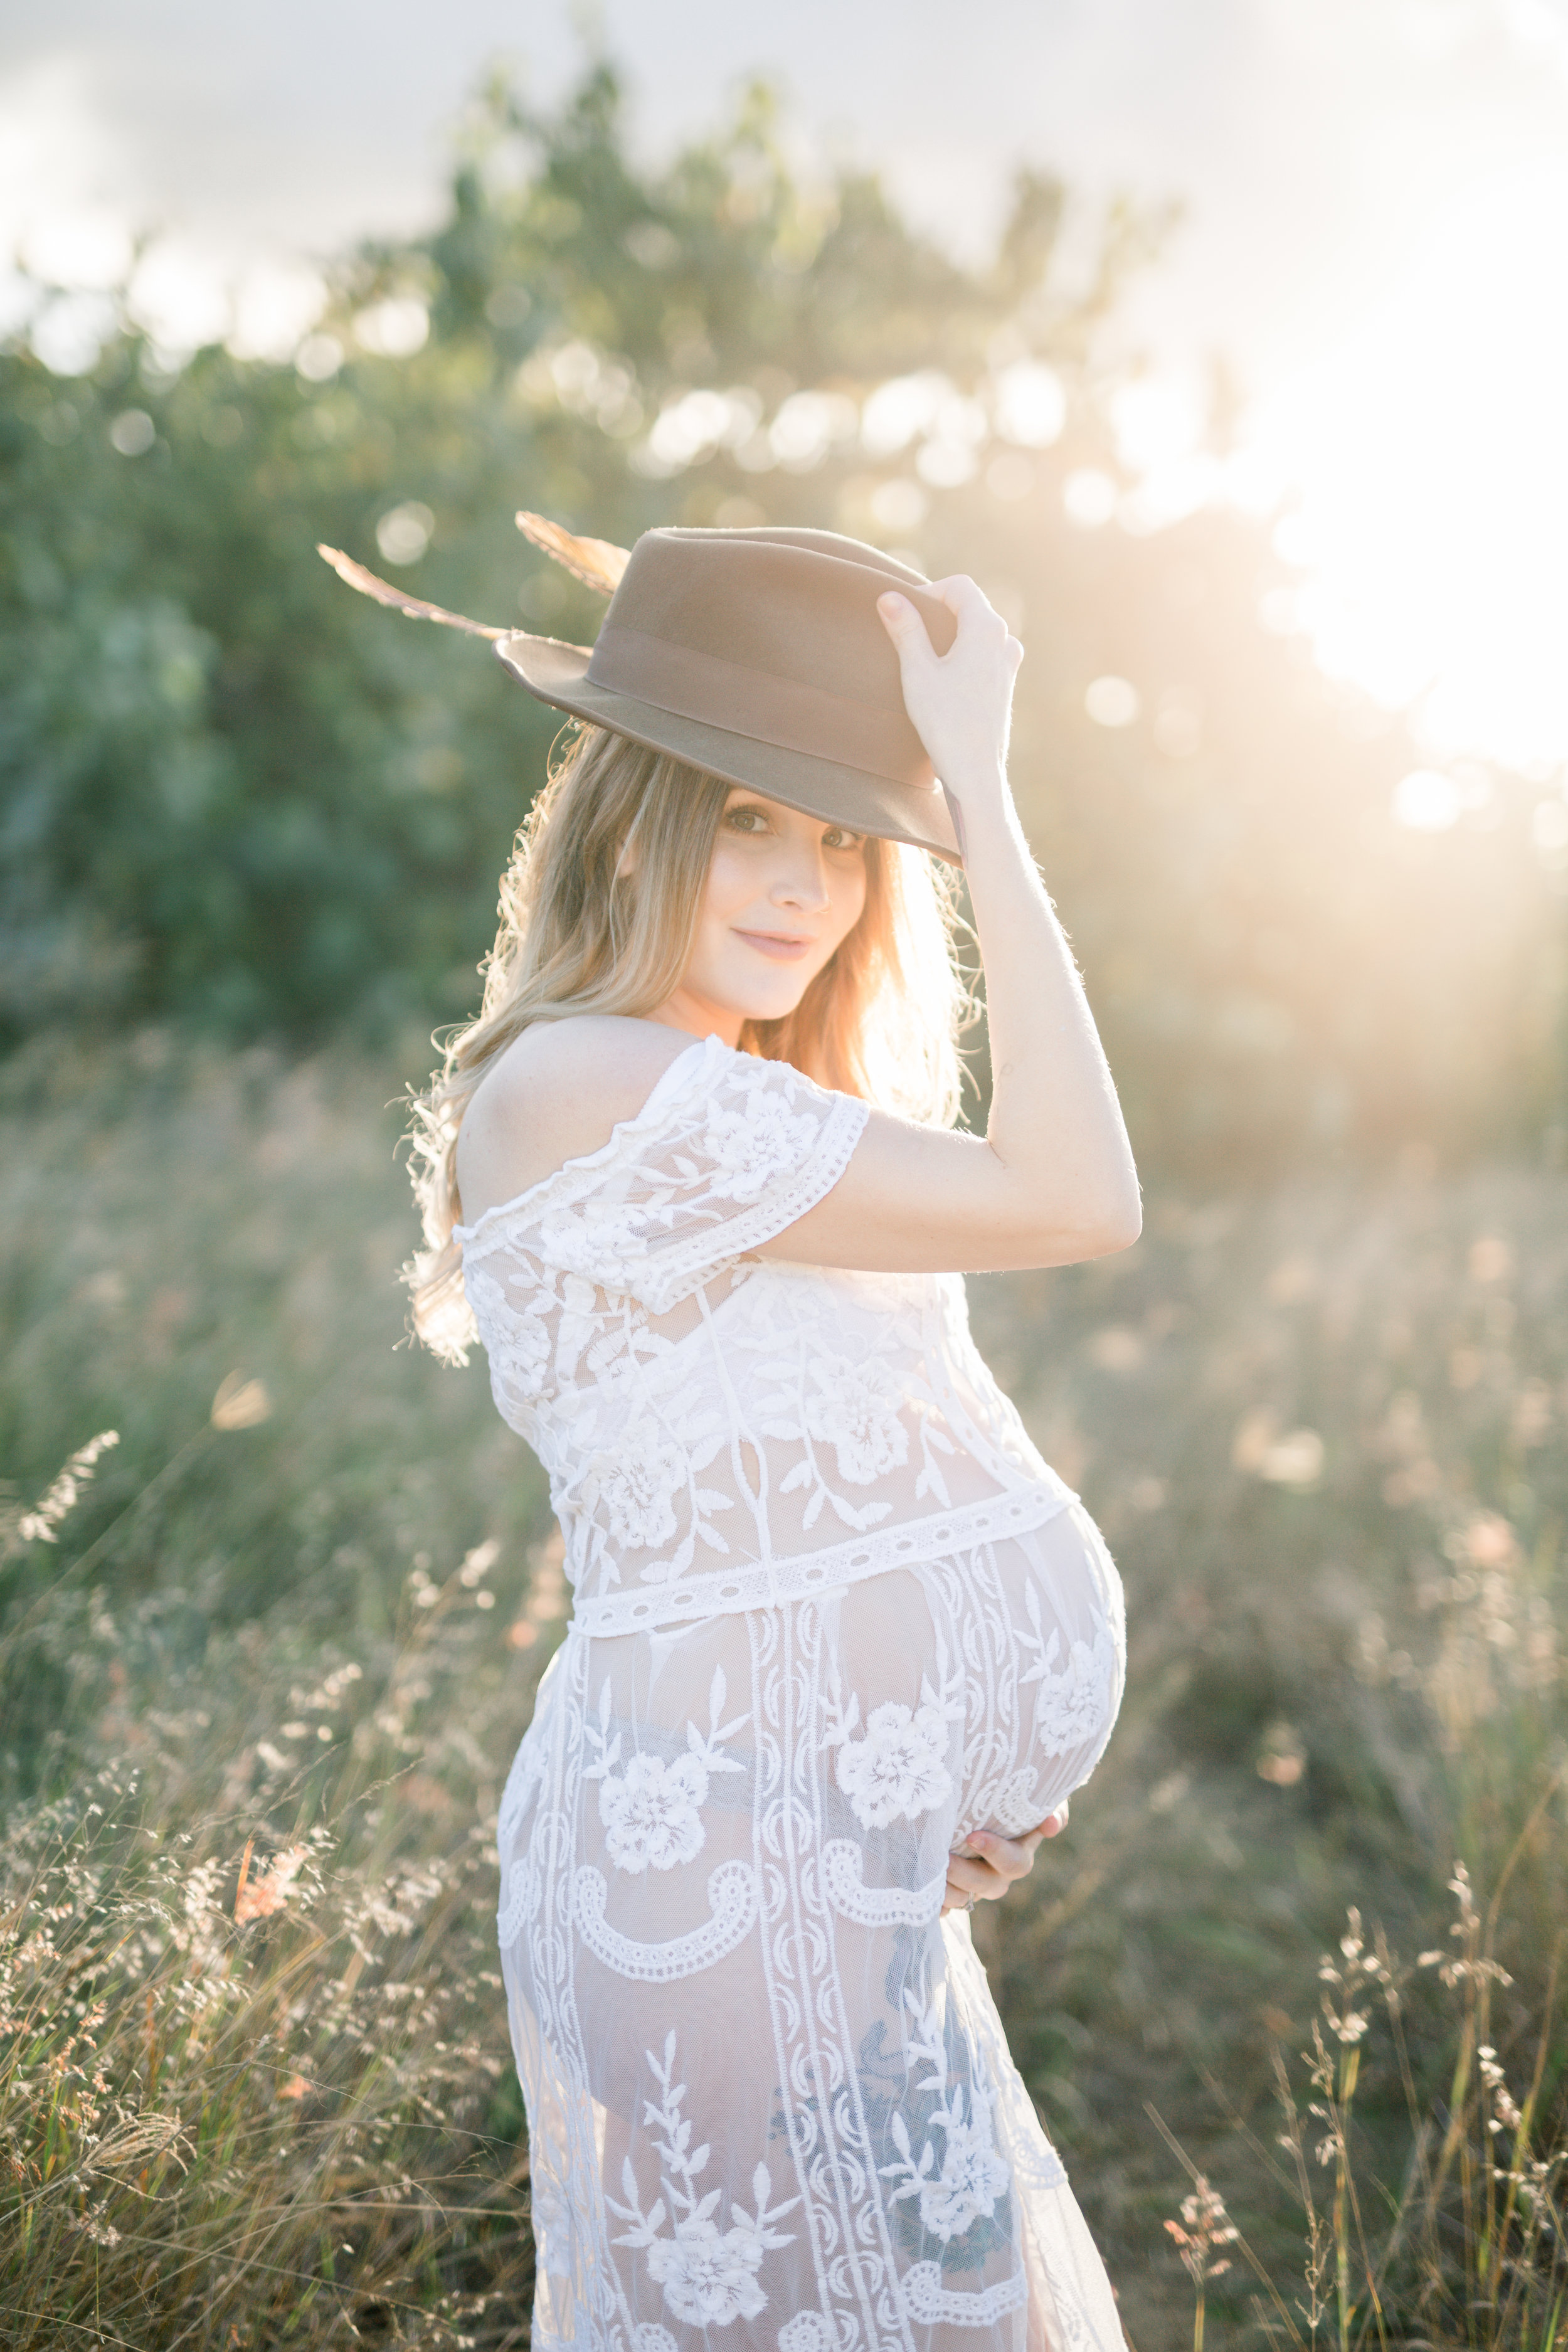 Mum to be wearing a feathered hat at sunset